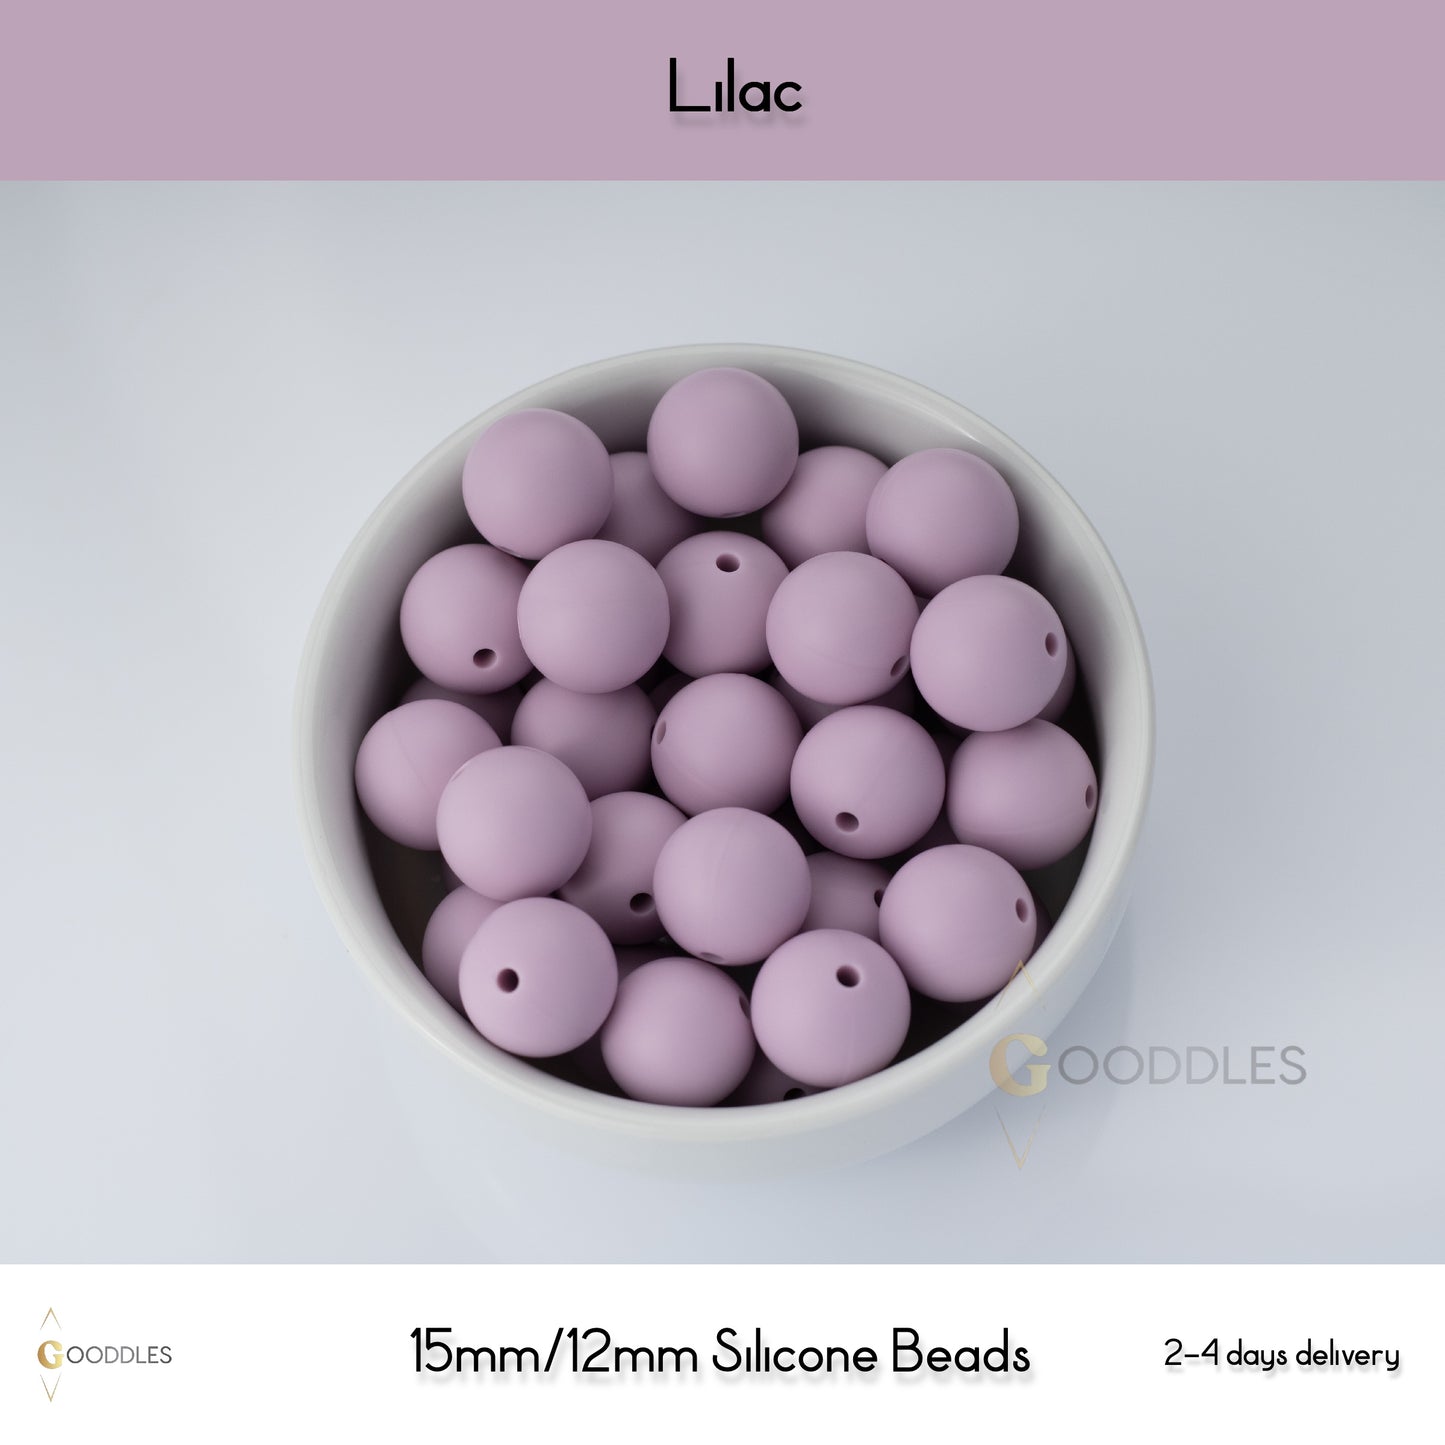 5pcs, Lilac Silicone Beads Round Silicone Beads